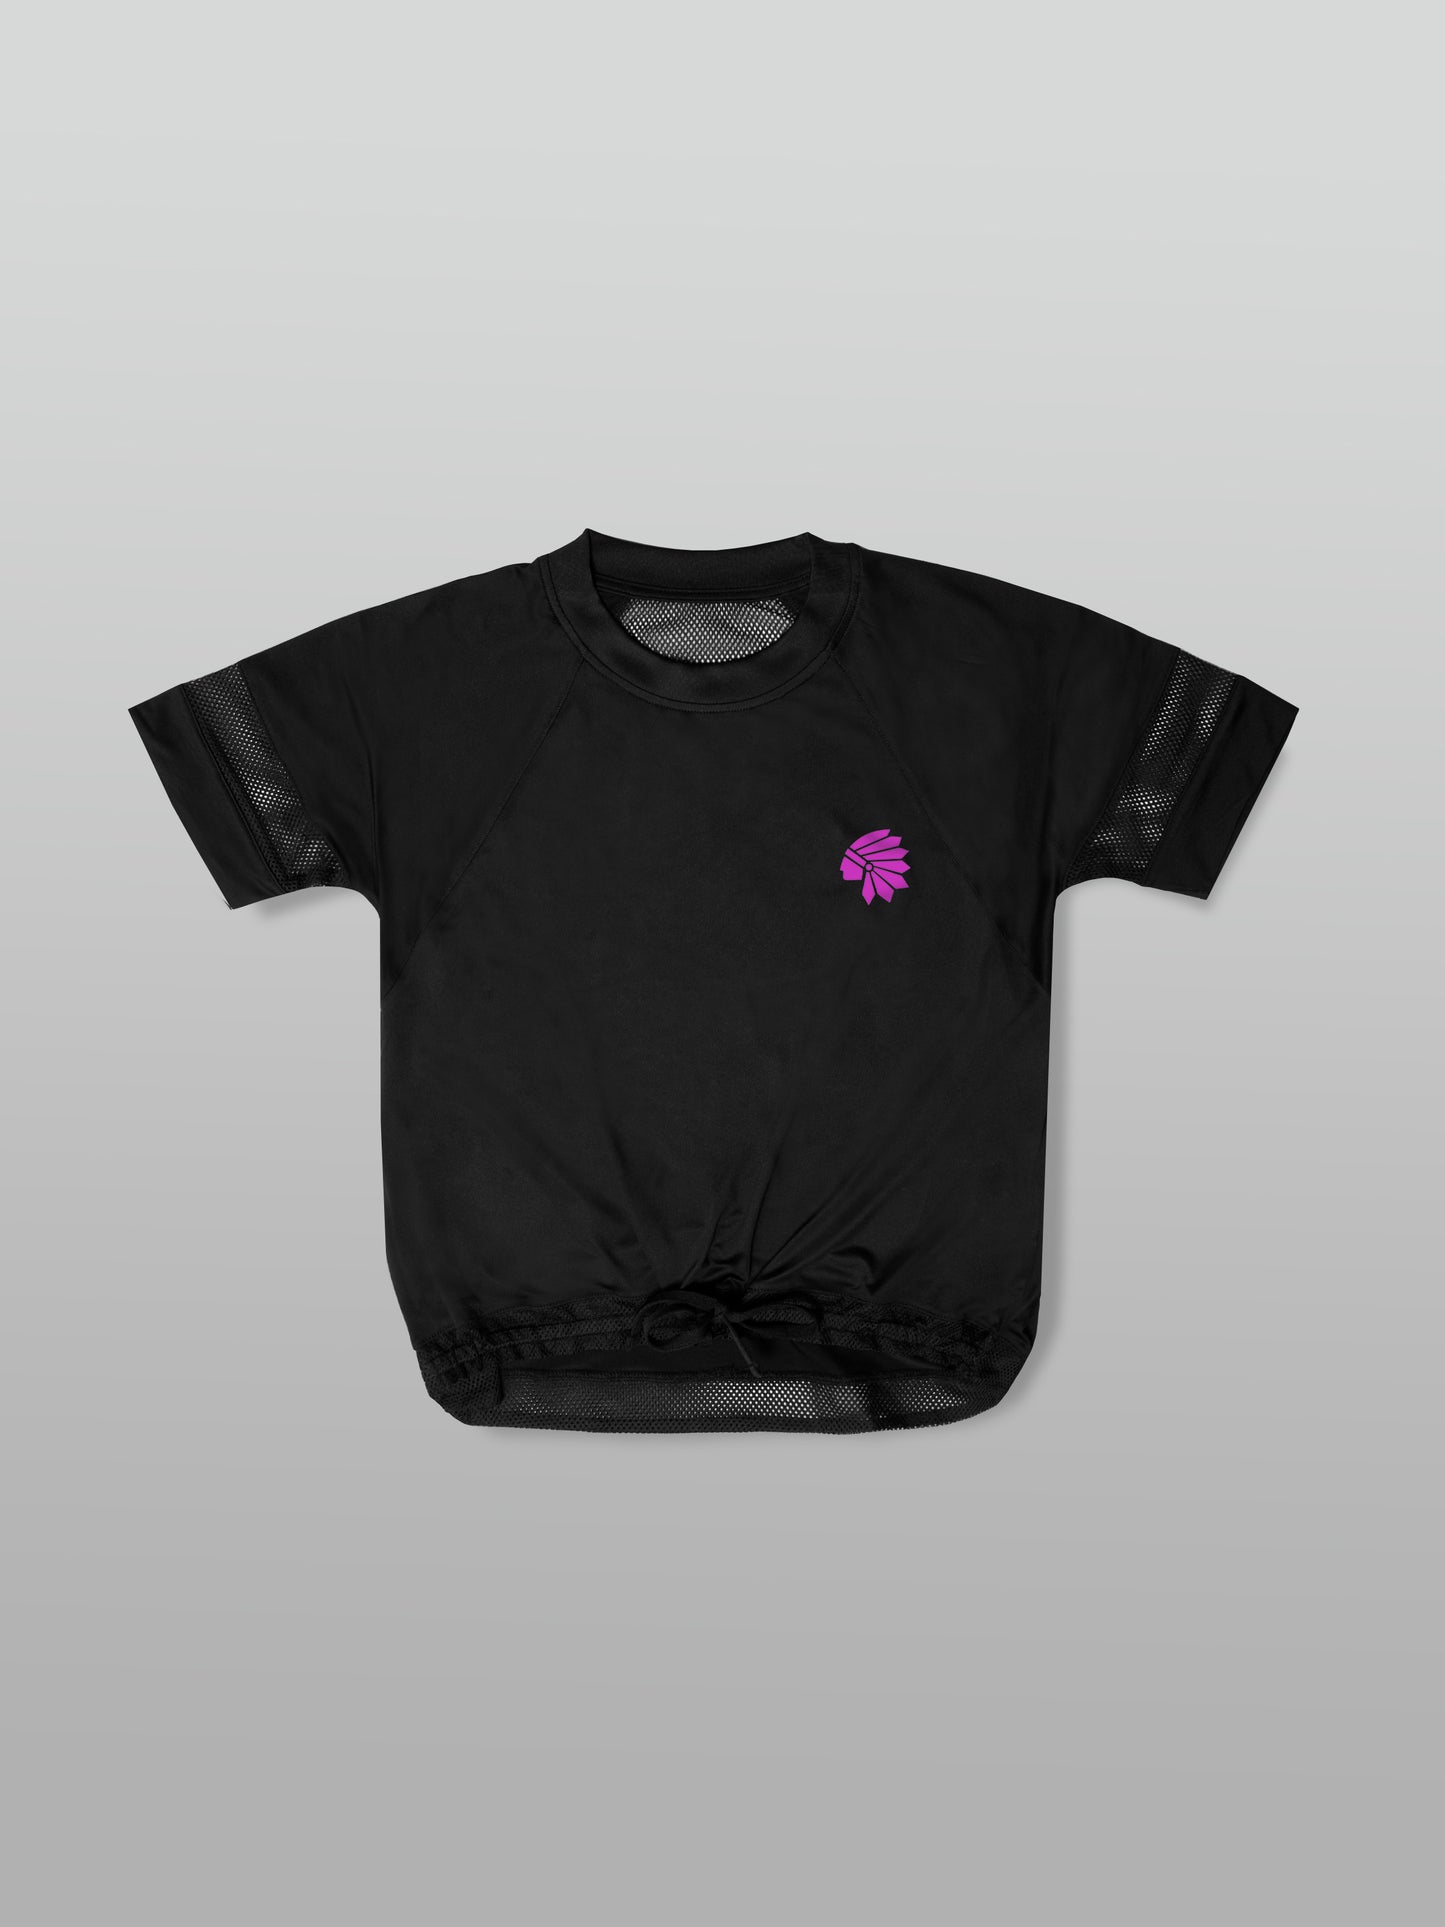 'Chief' Over Tee Black